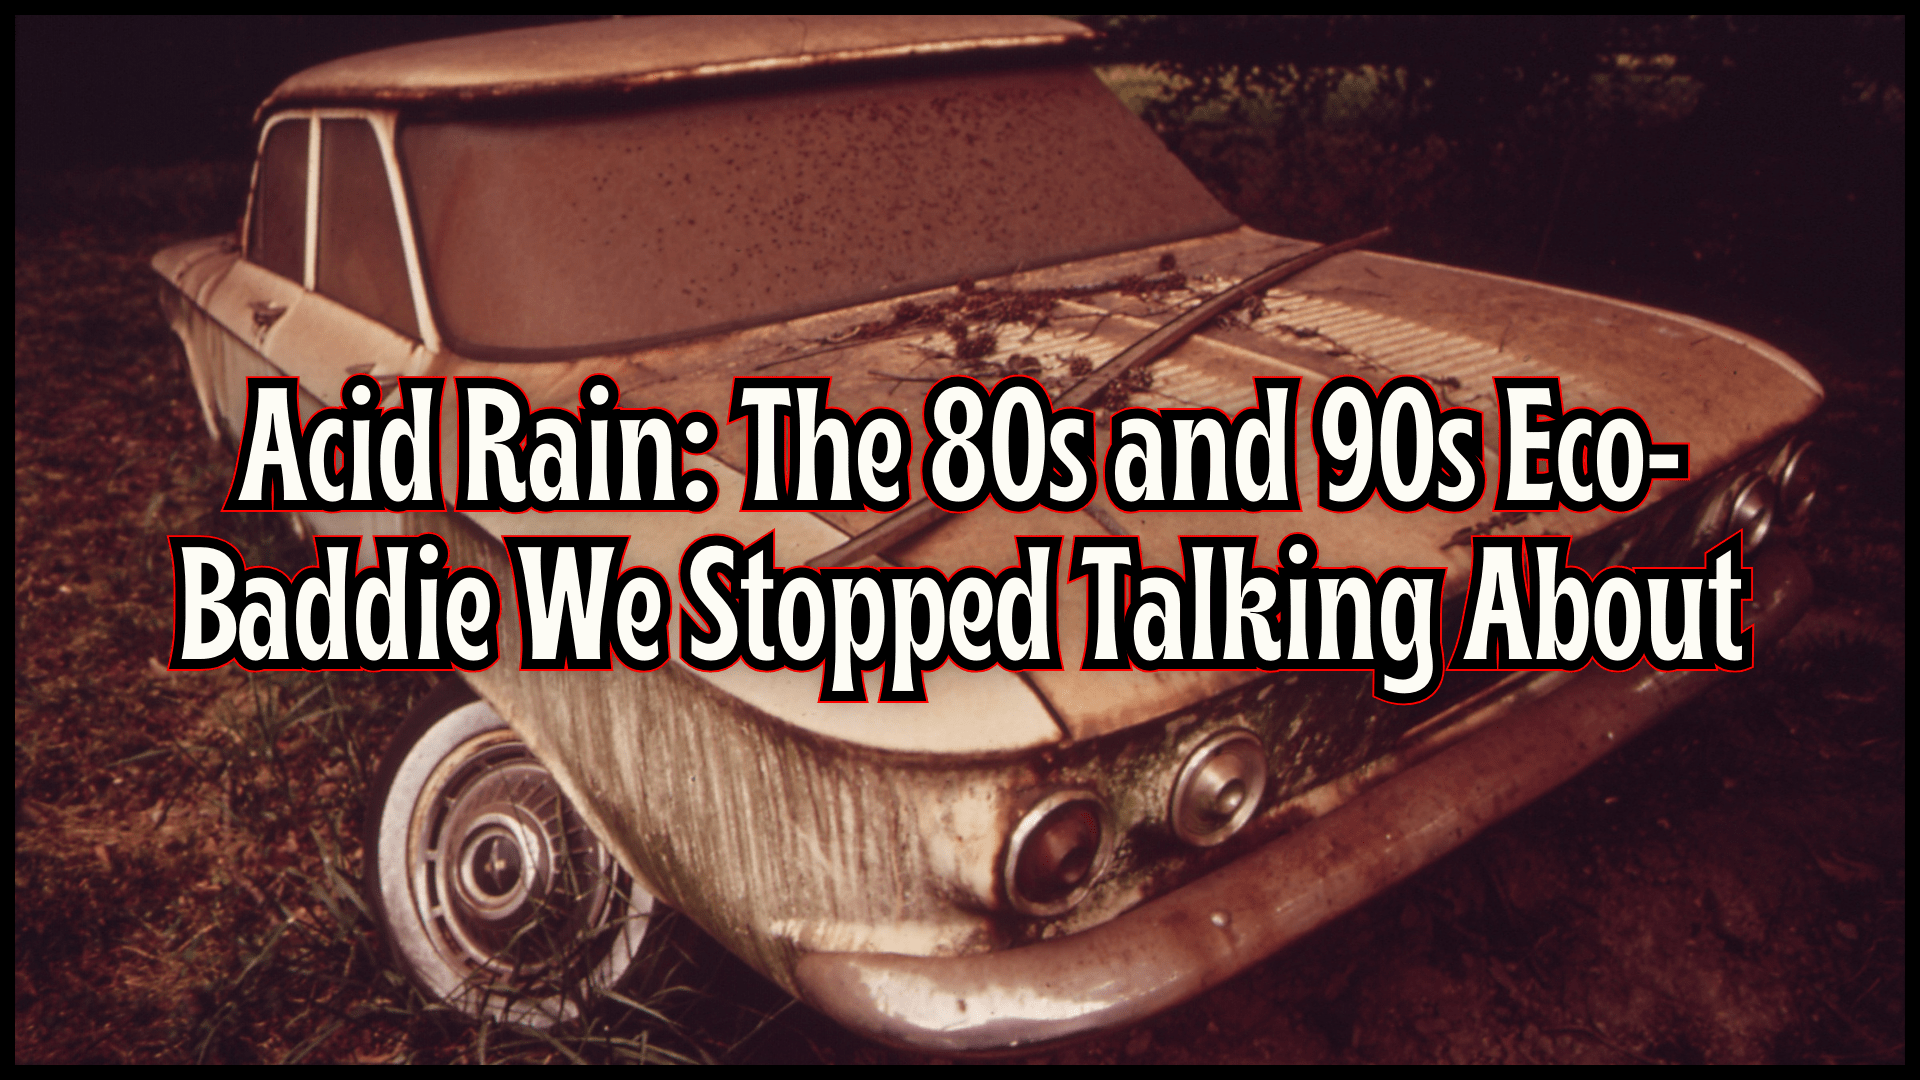 Acid Rain: The 80s and 90s Eco-Baddie We Stopped Talking About